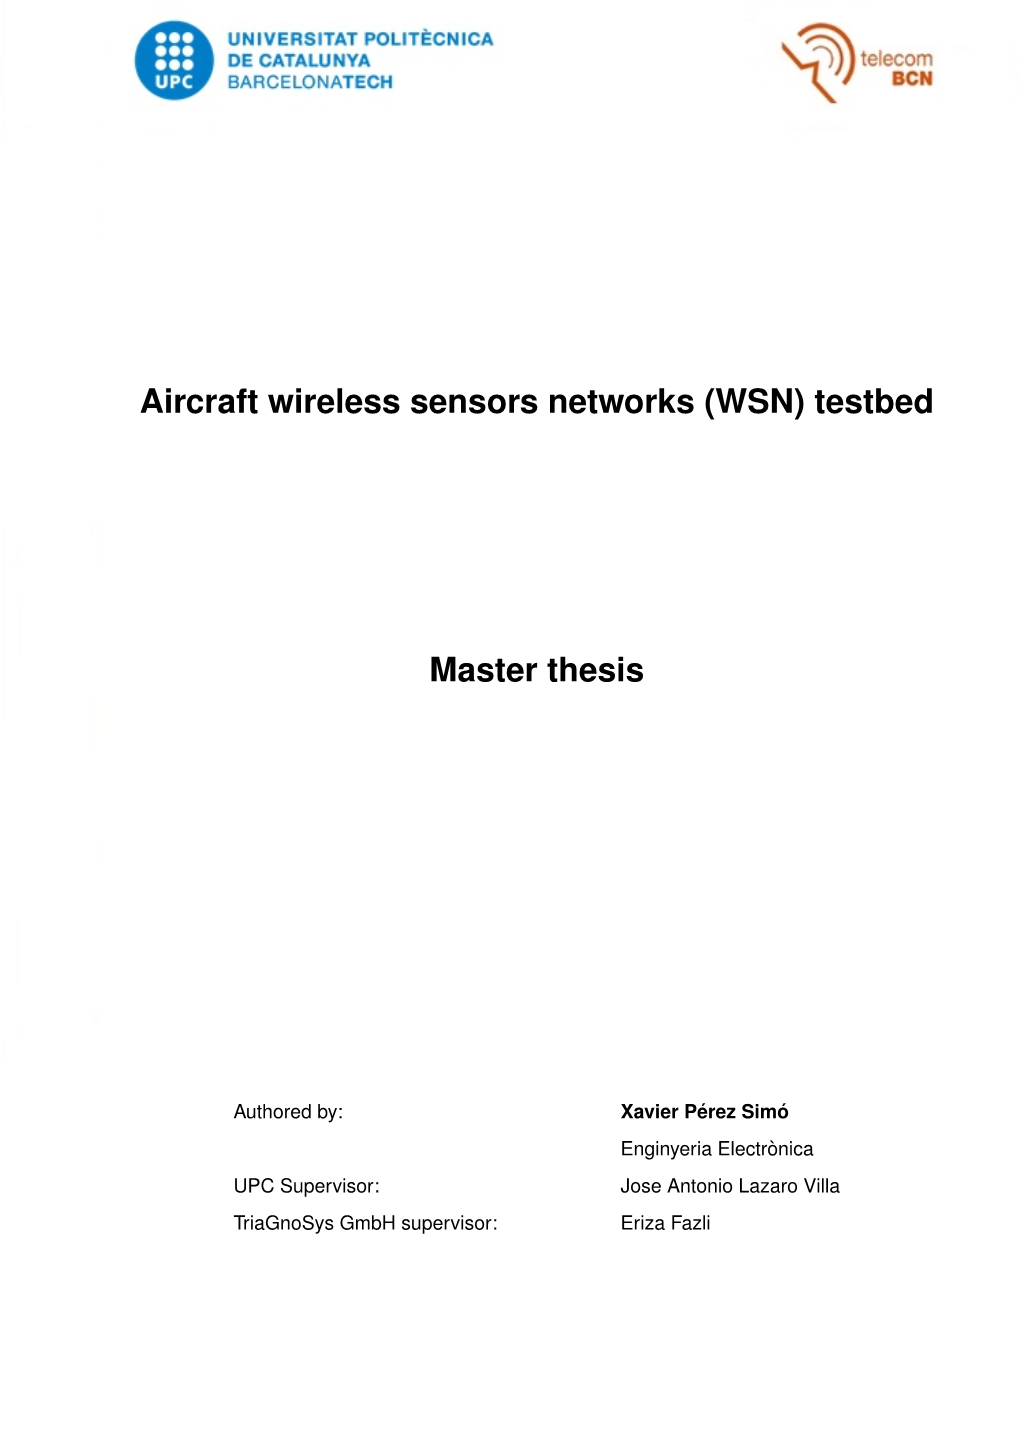 Aircraft Wireless Sensors Networks (WSN) Testbed Master Thesis